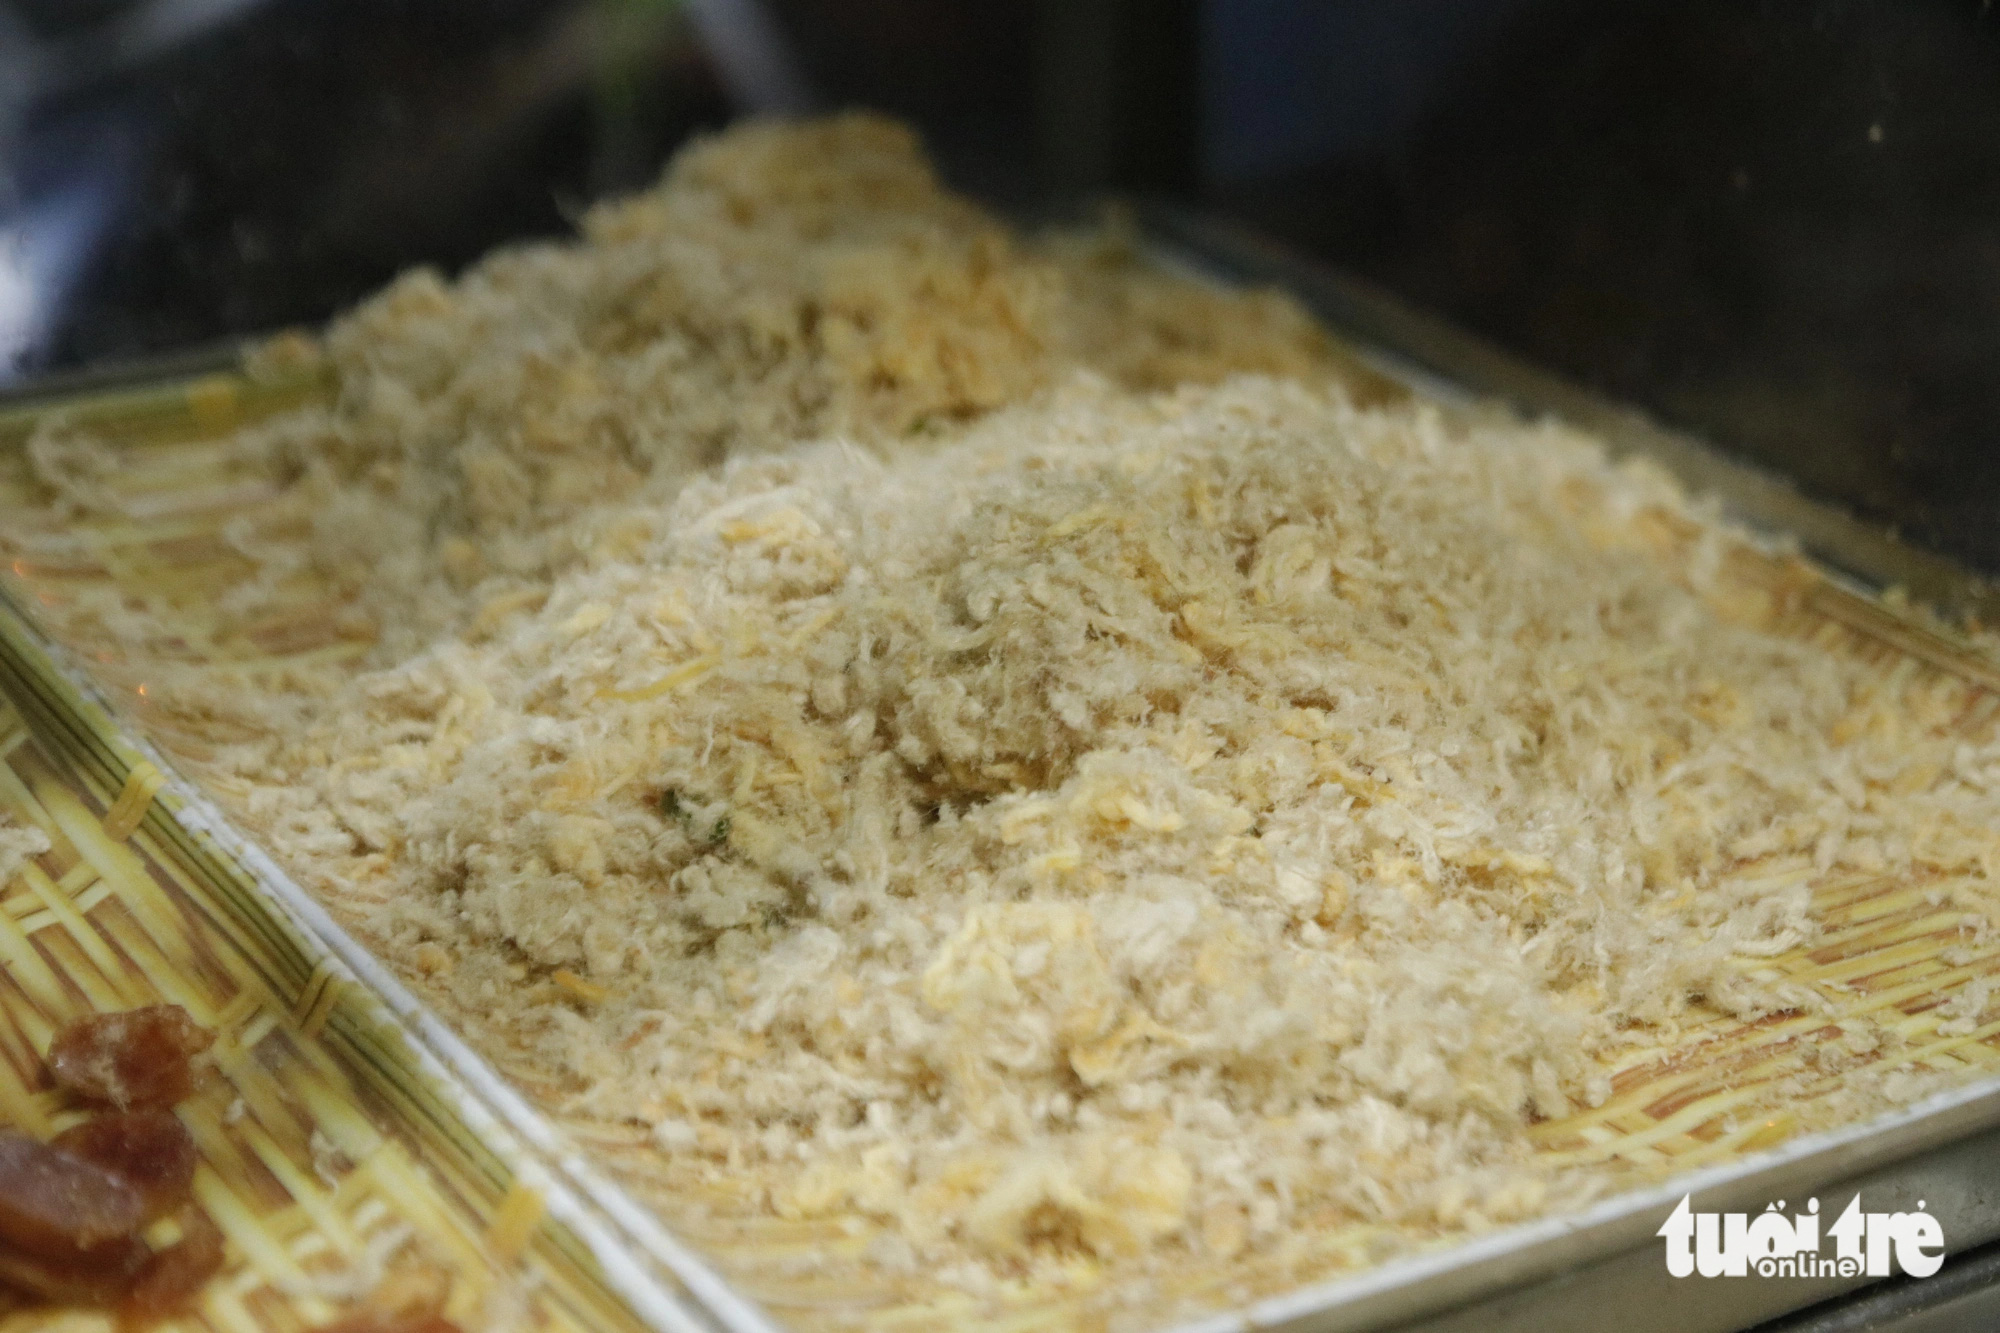 Meat floss is made by the owner of the renowned ‘Xôi Mặn’ (Savory Sticky Rice) 409 shop on Tran Phu Street in District 5, Ho Chi Minh City. Photo: Ho Lam / Tuoi Tre